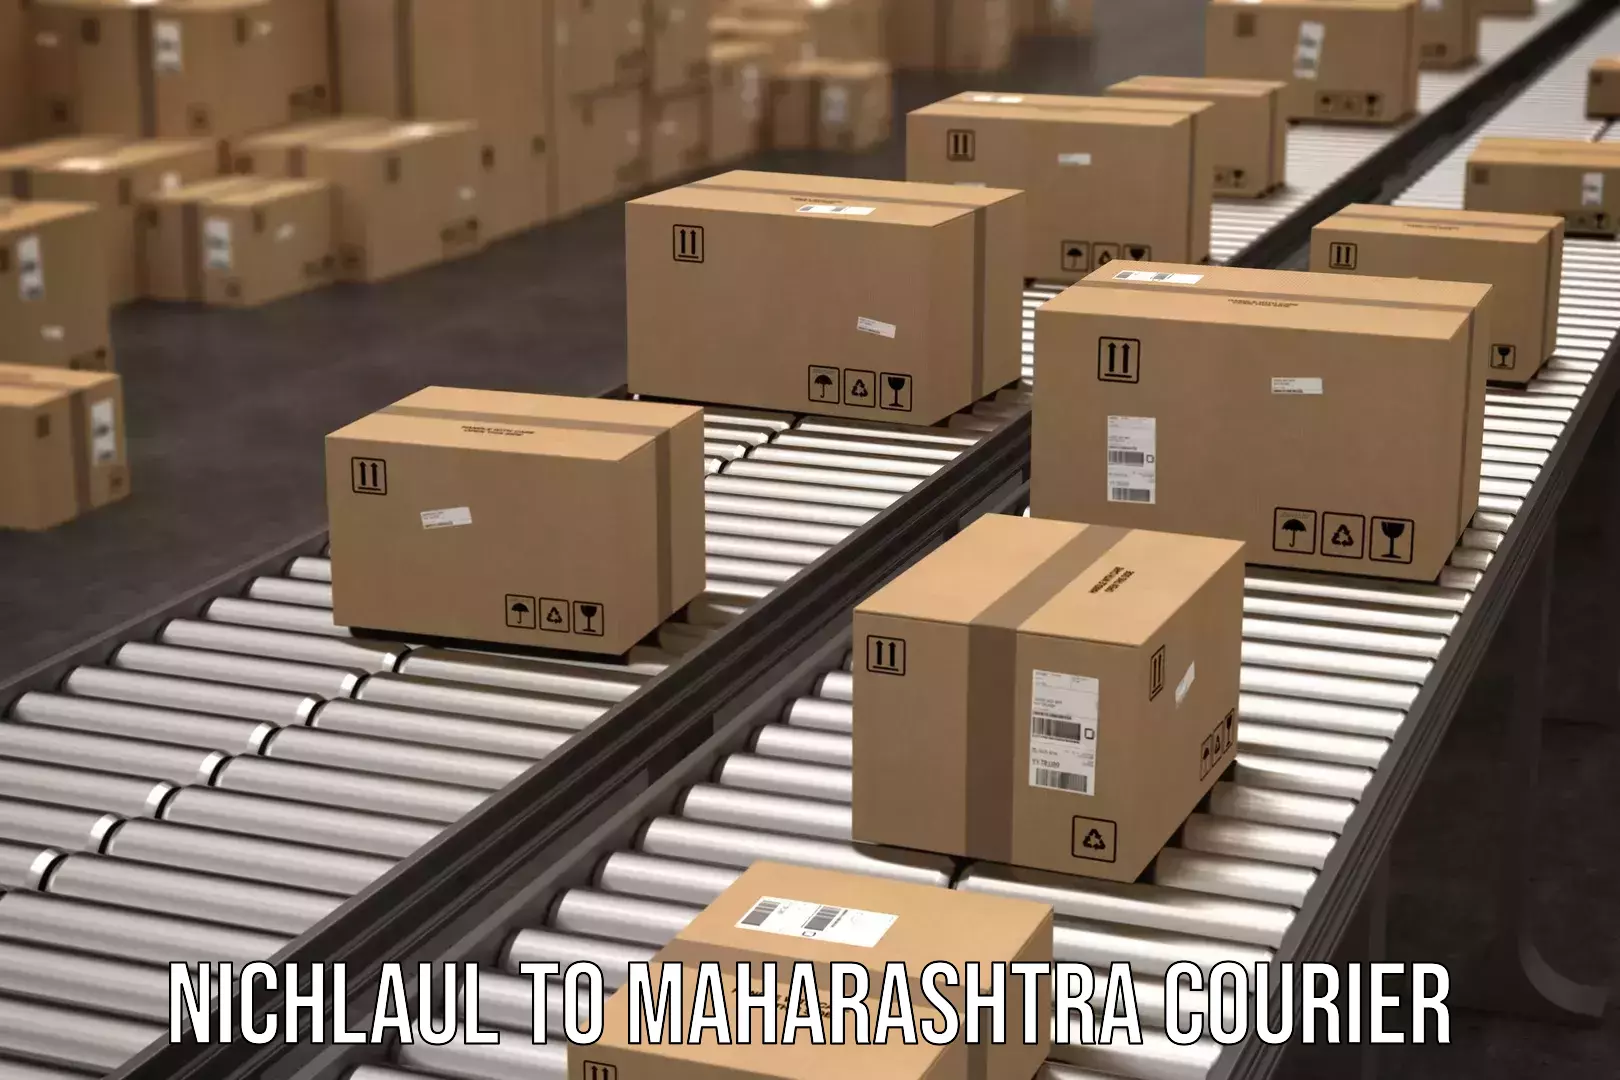 Ocean freight courier Nichlaul to Maharashtra